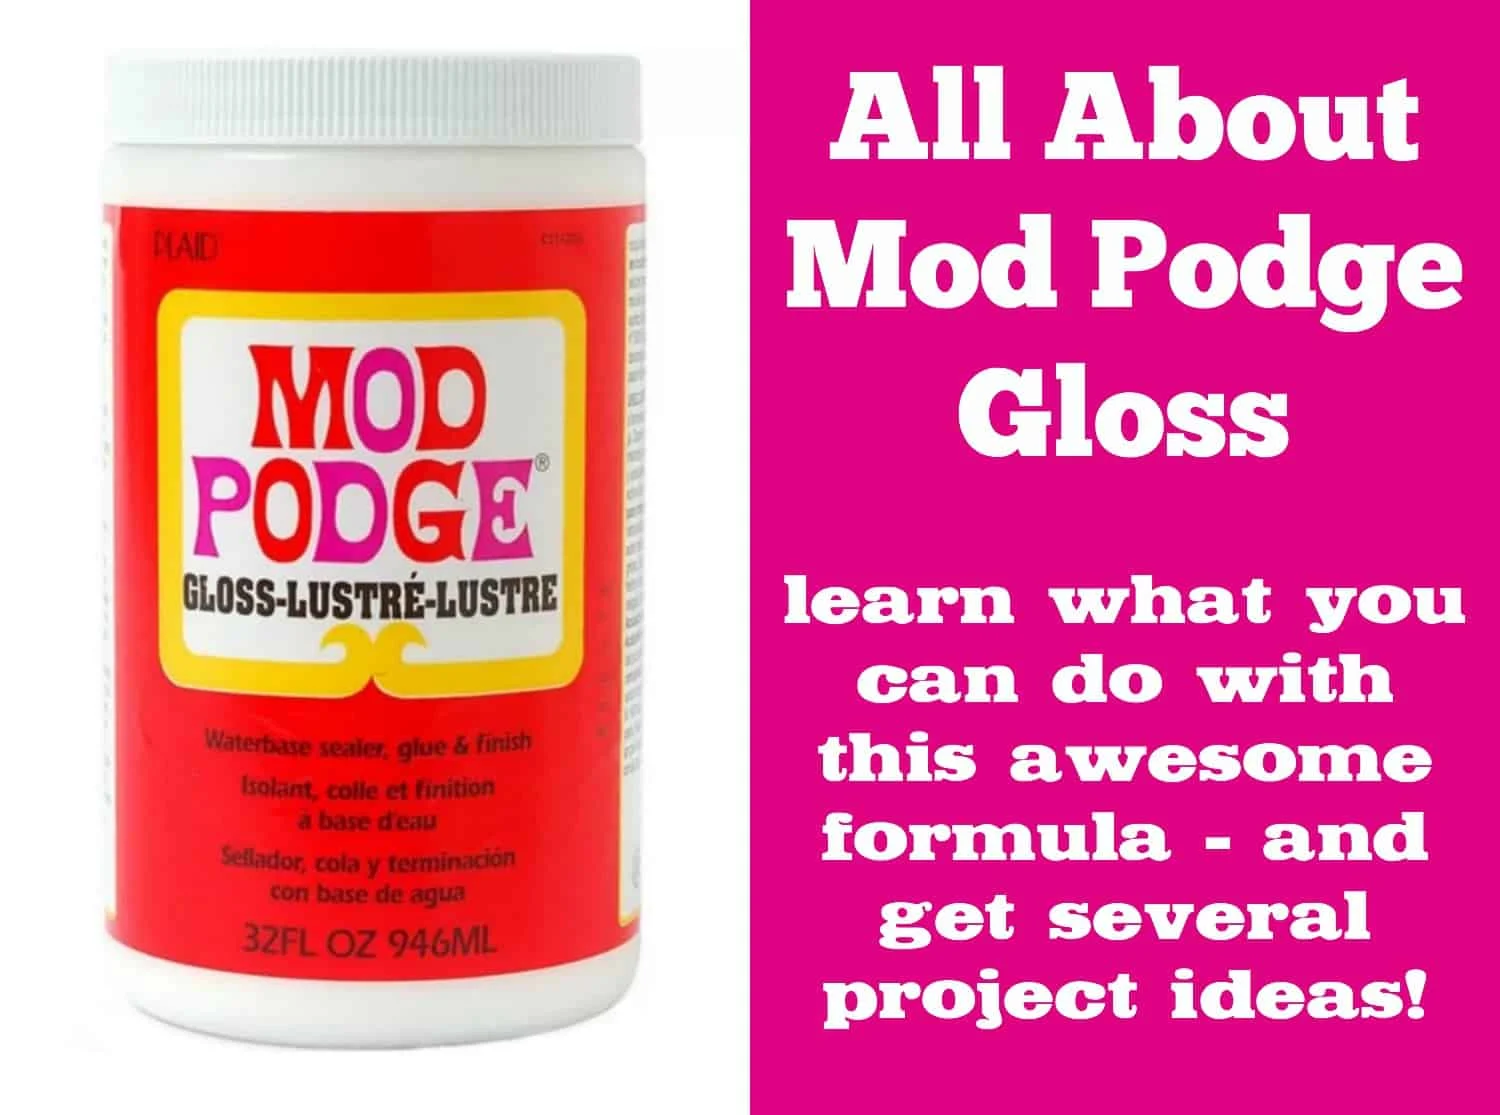 Learn all about the Mod Podge Gloss formula! Find out what it is, how to use it, and see some unique projects you can make.